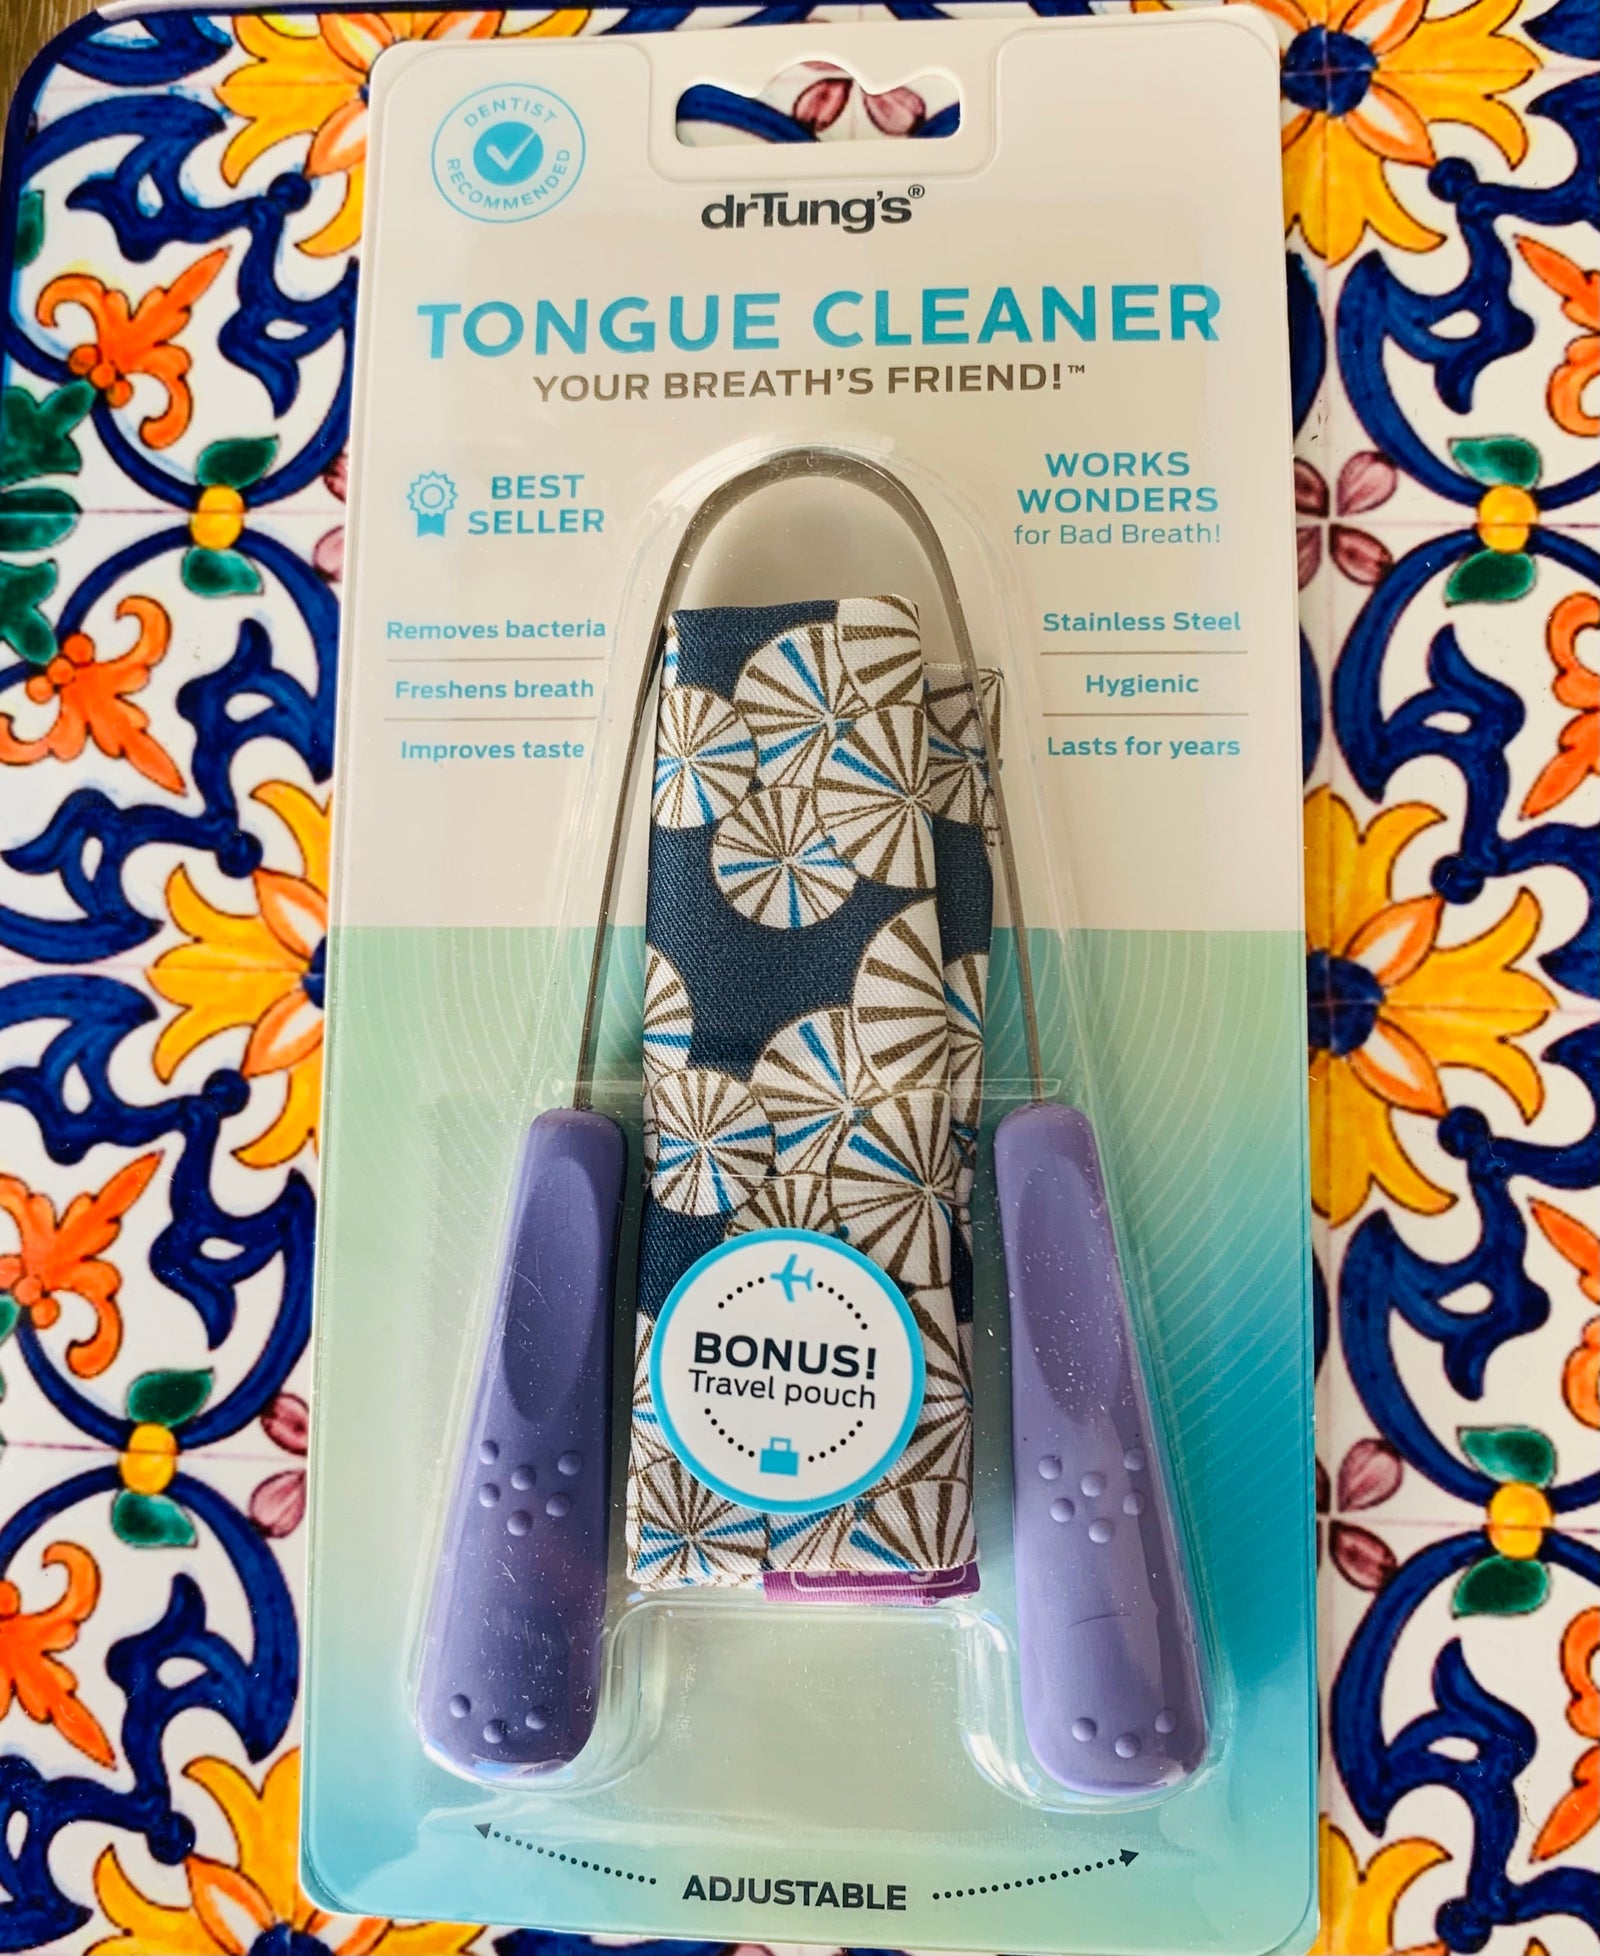 Tongue Cleaner with travel pouch